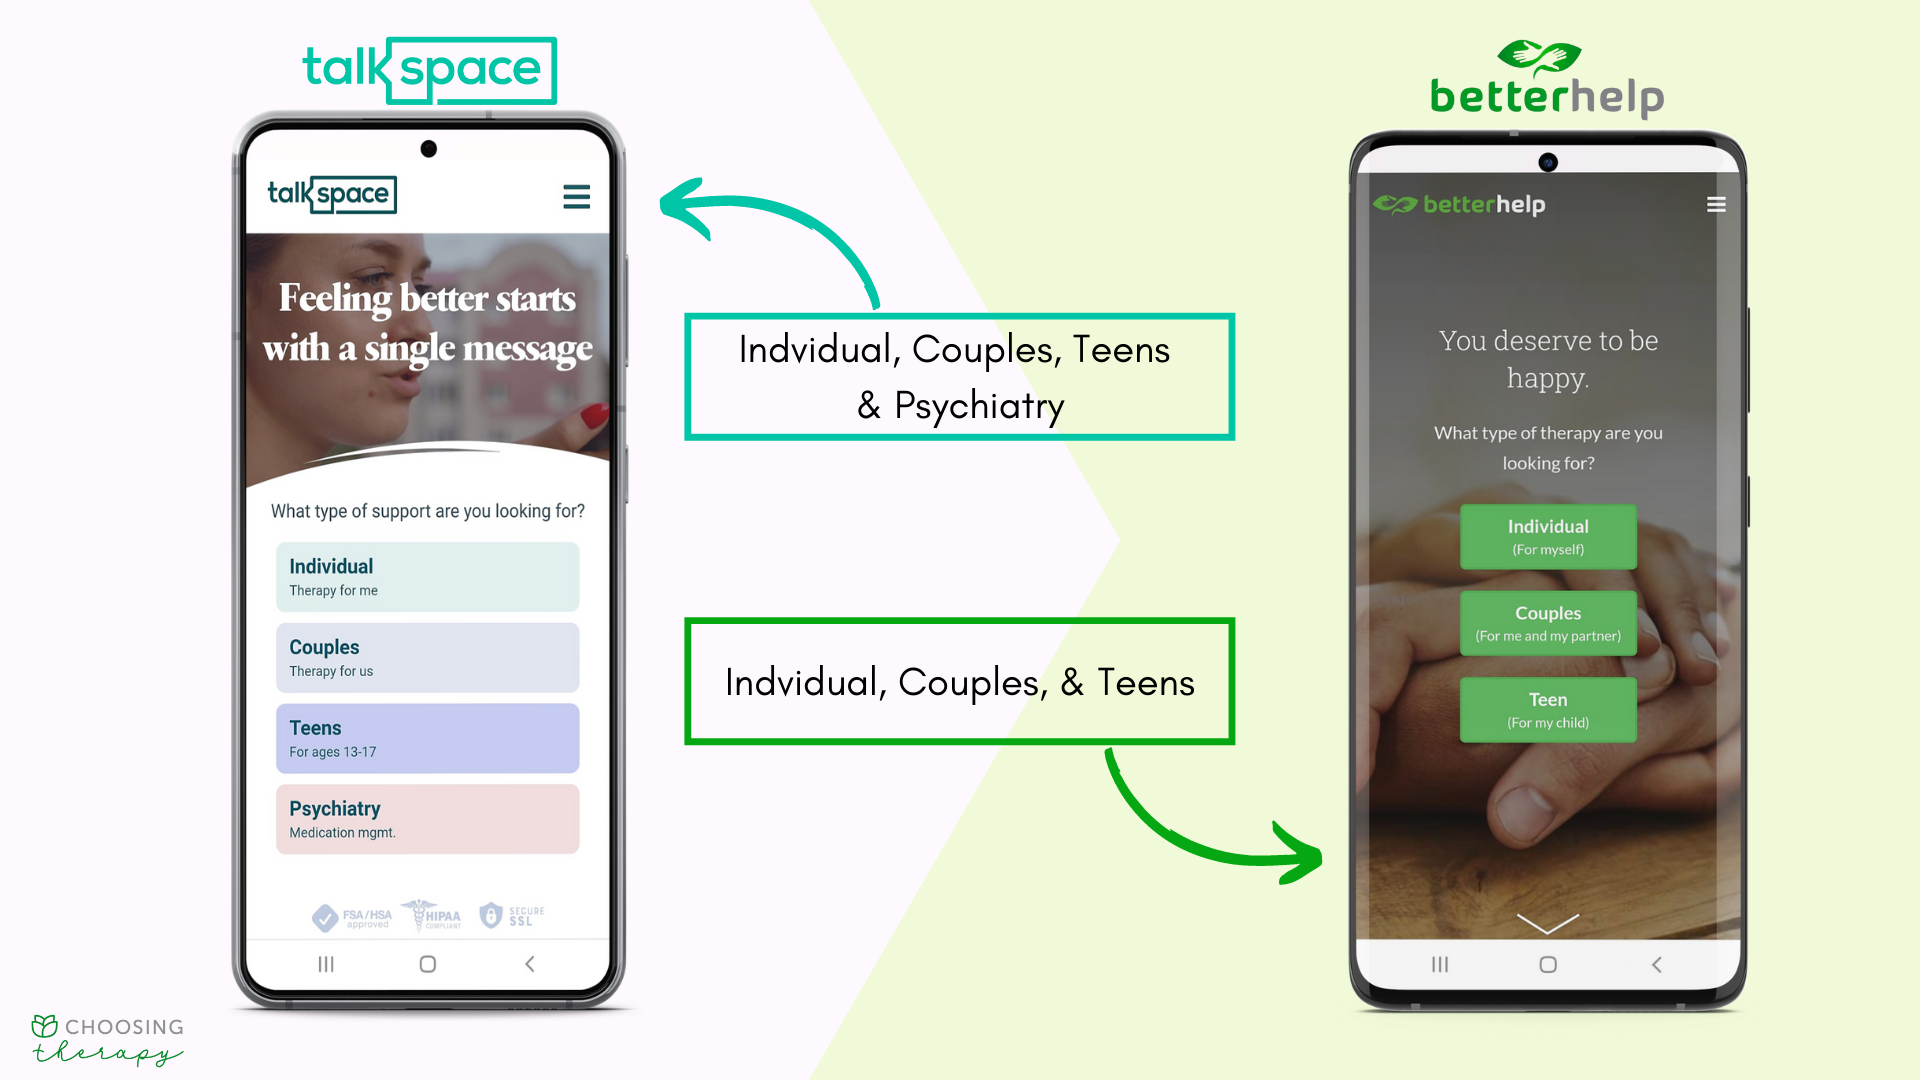 Talkspace vs BetterHelp Review 2022 - Image of main website shots showing what each offers